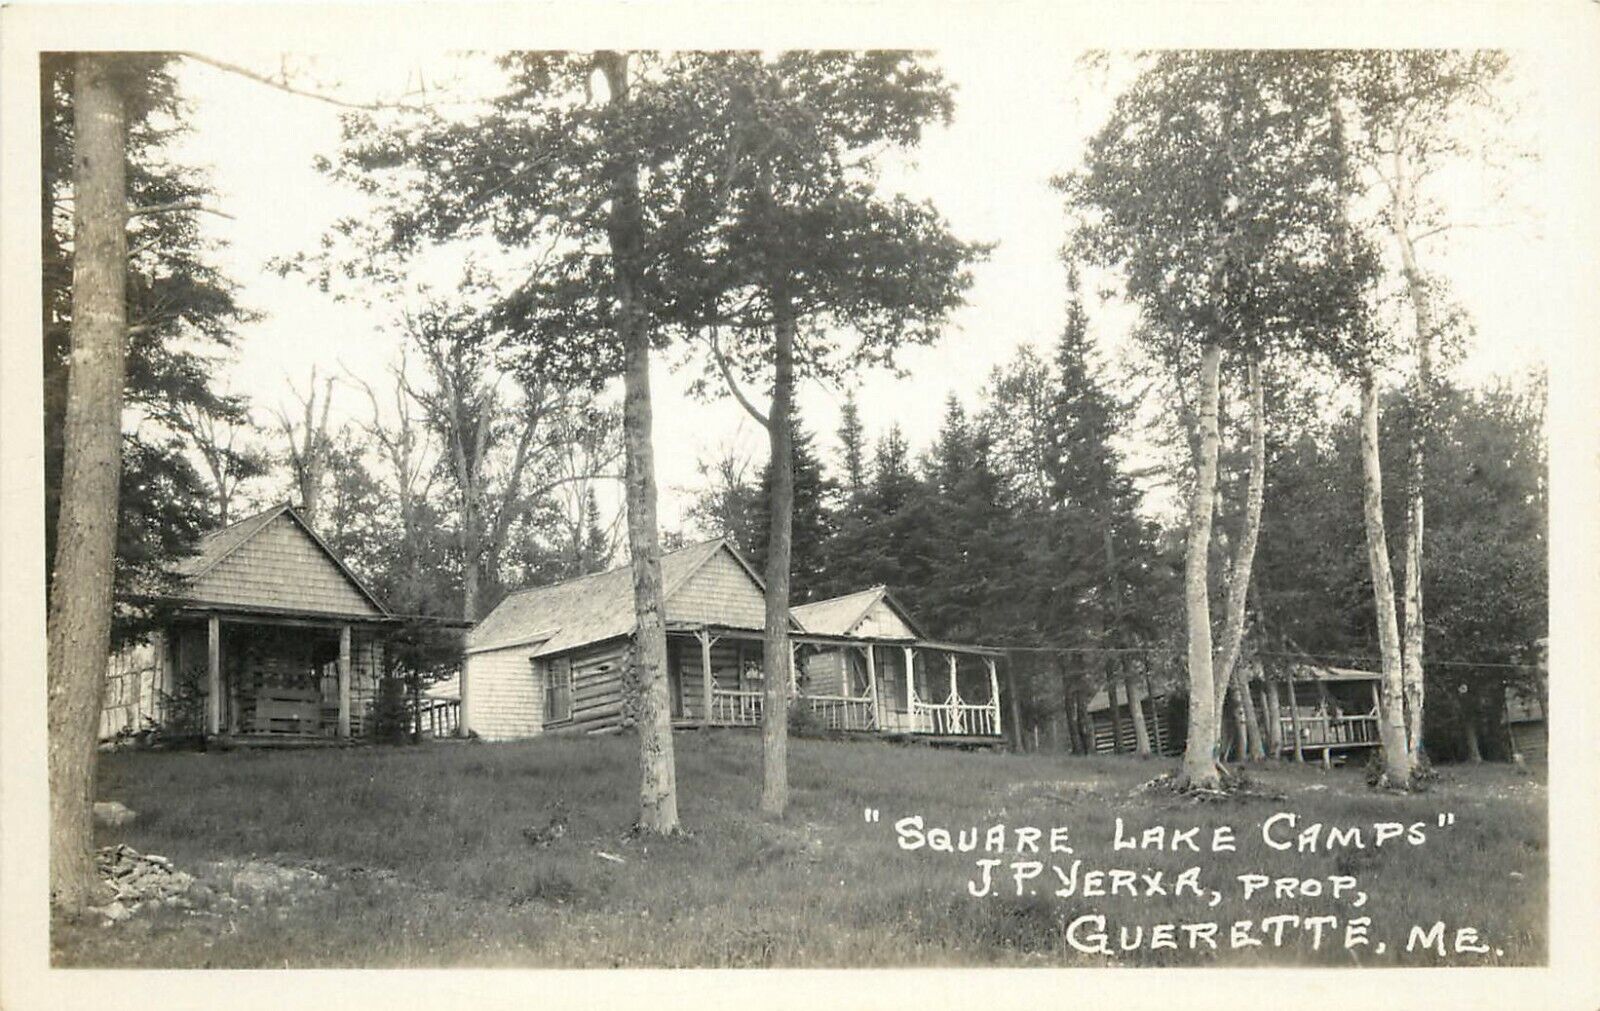 1930s RPPC Postcard Square Lake Camps Cabins, Guerette ME Aroostook County